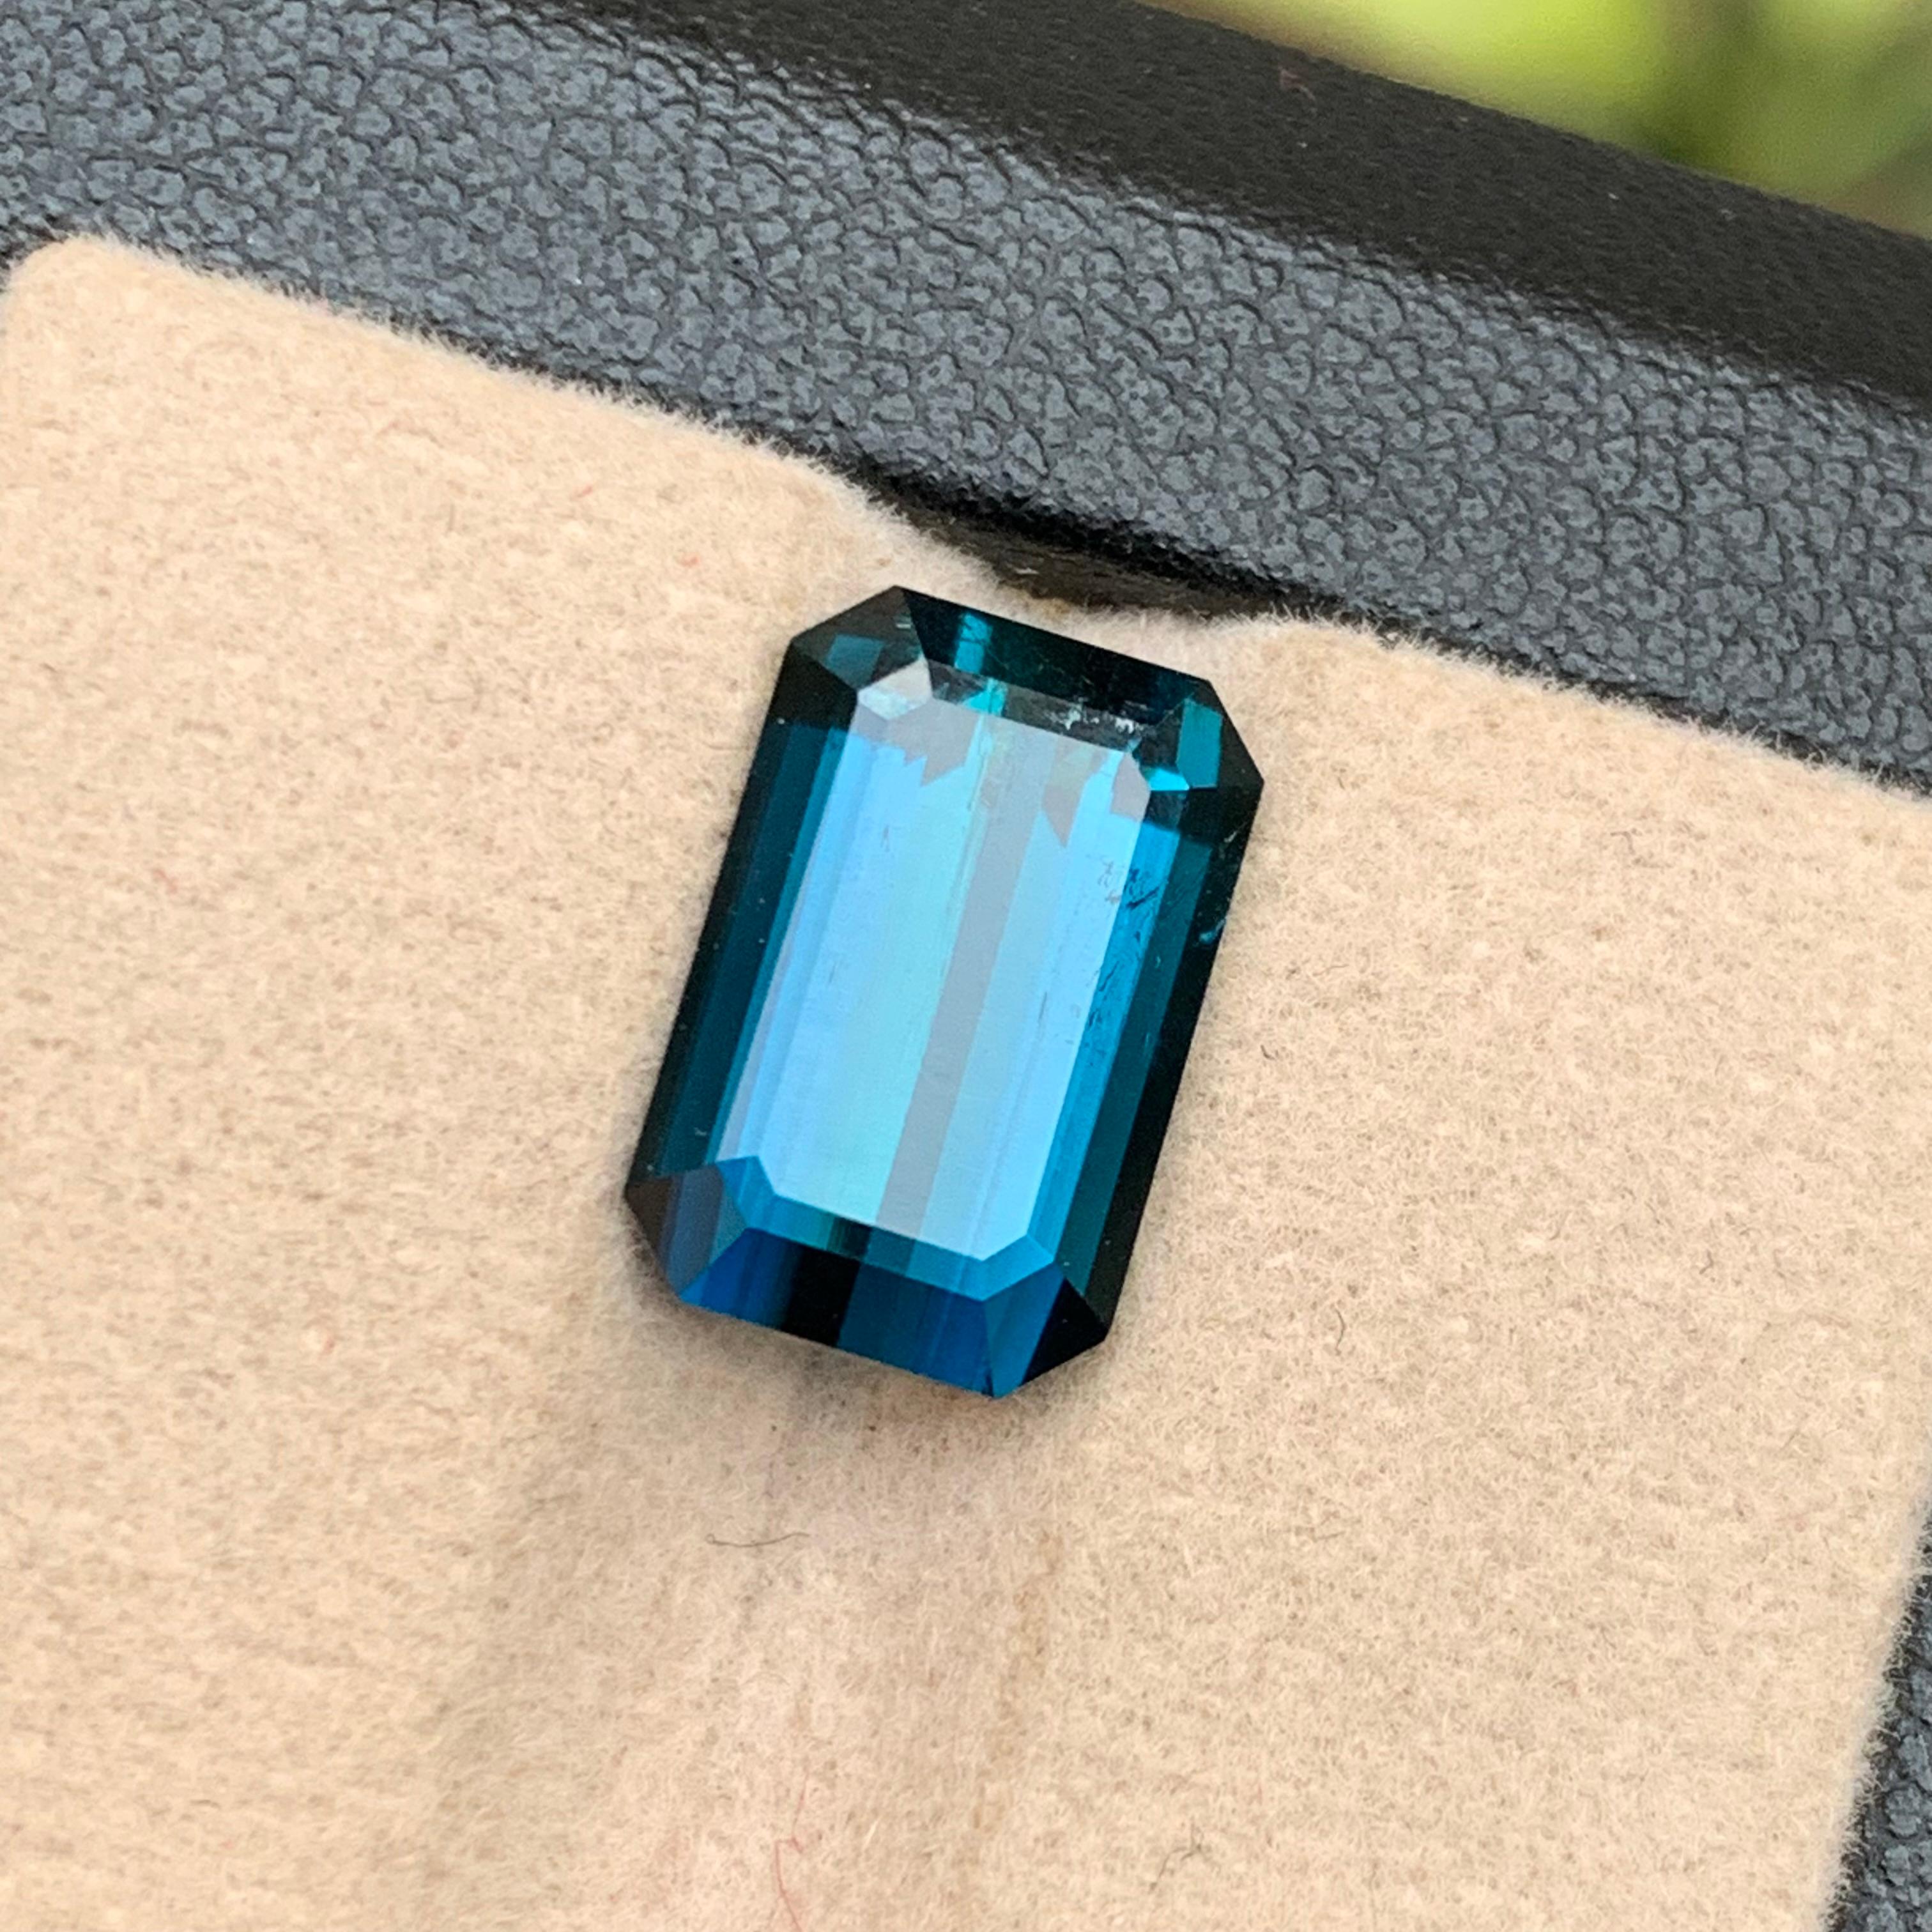 Rare Deep Inky Blue Natural Tourmaline Gemstone, 6.15 Ct Emerald Cut for Ring Af 2